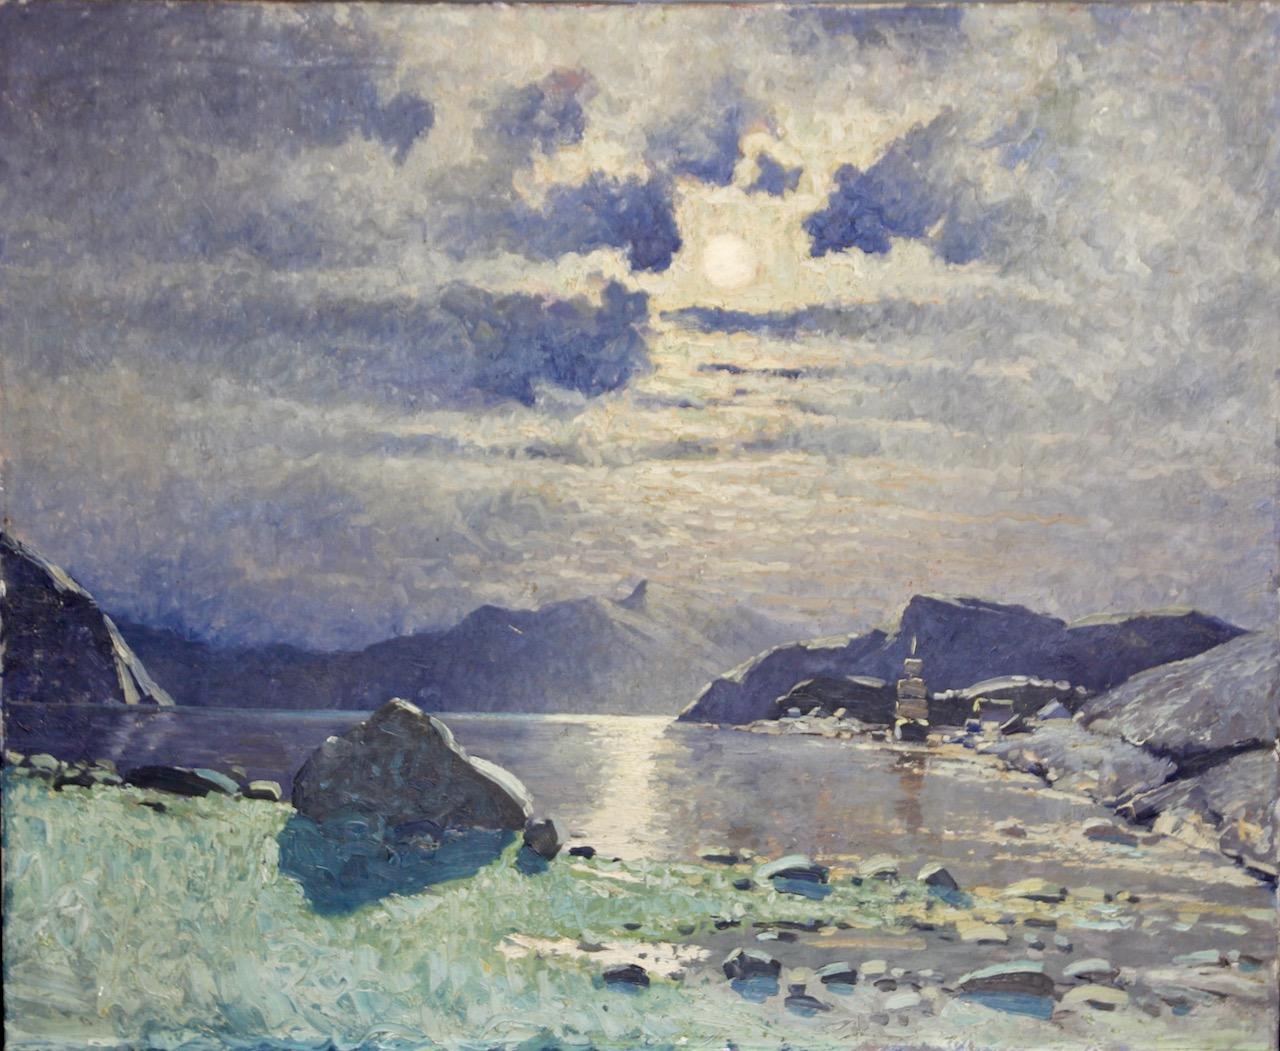 Decorative antique Painting. Atmospheric seascape, shoreline in the moonlight. For Sale 1